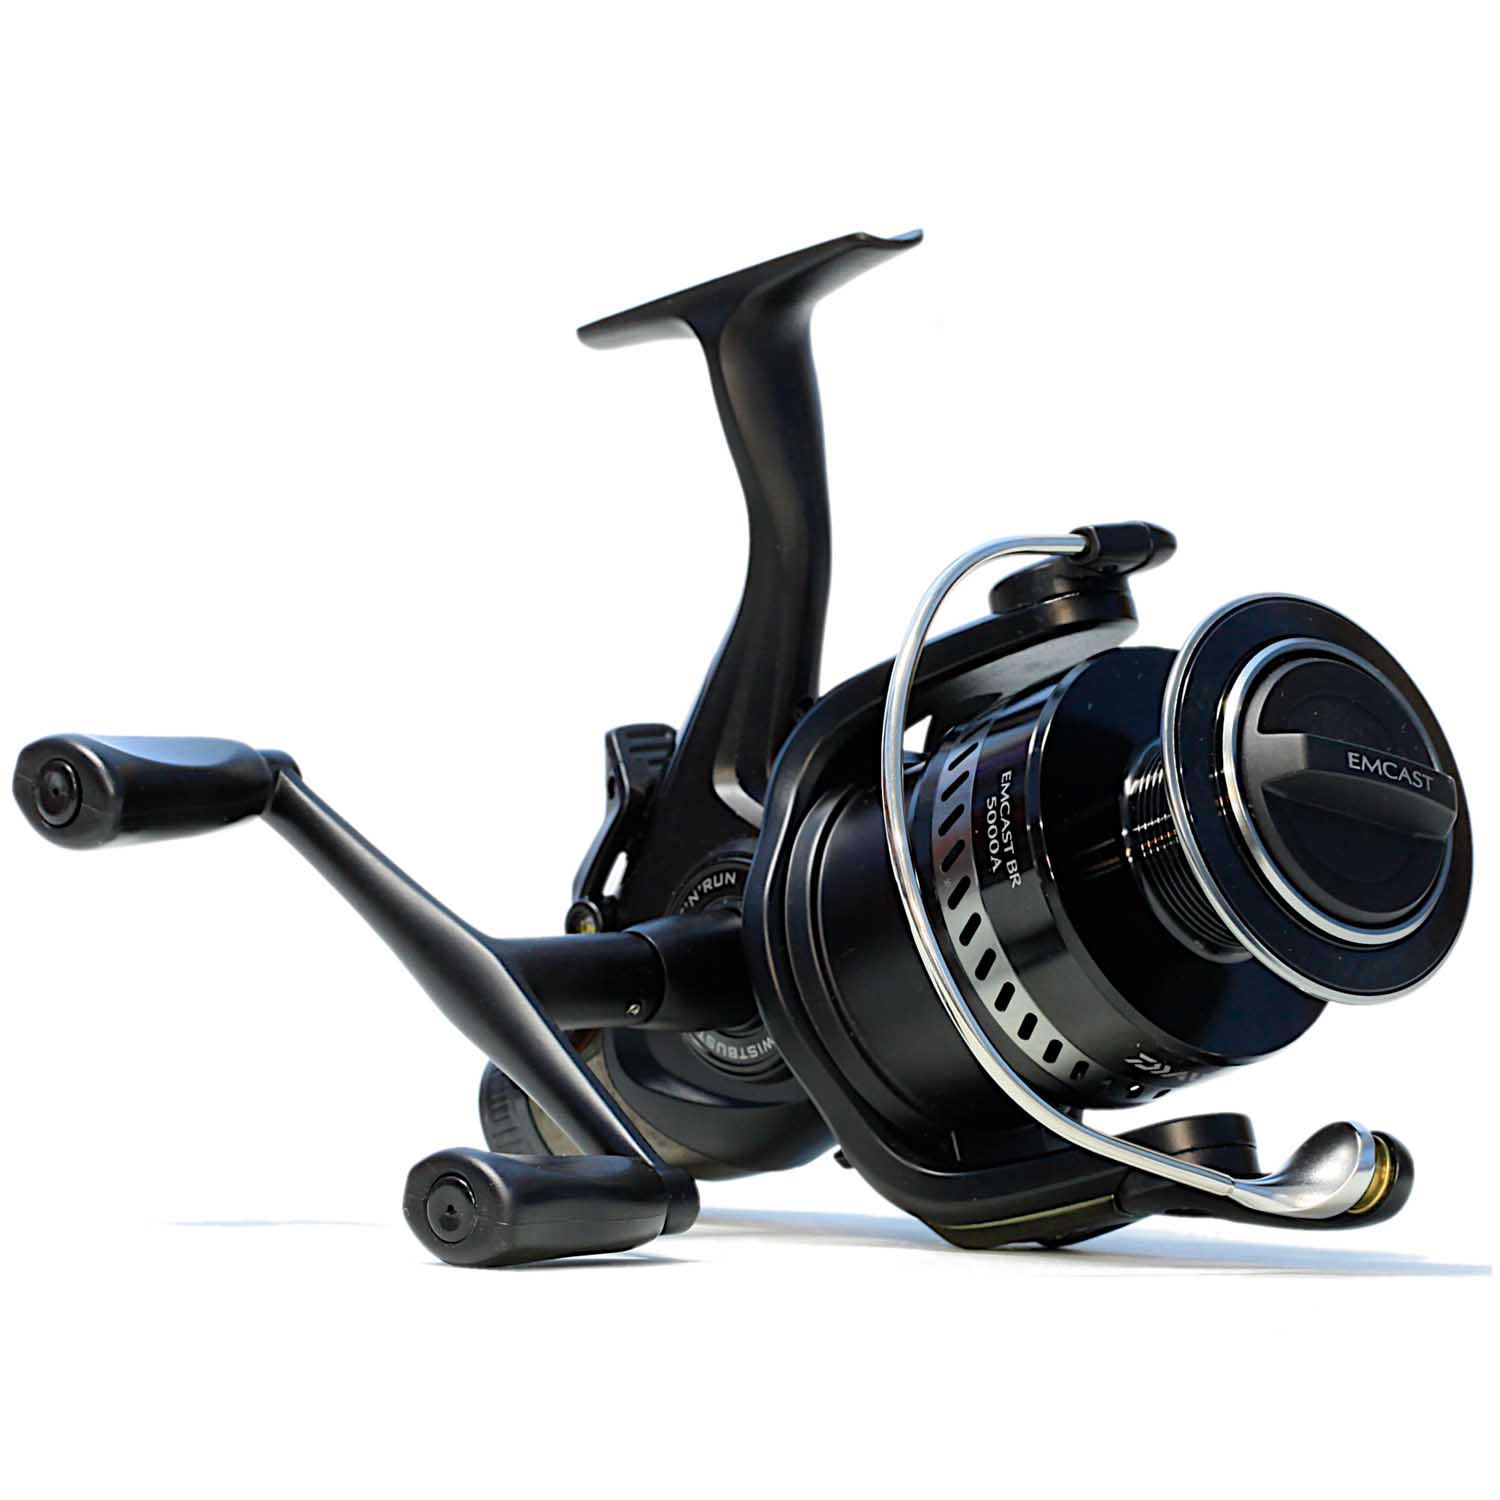 Daiwa Emcast Br Spinning Reel Spare Spool Showspace